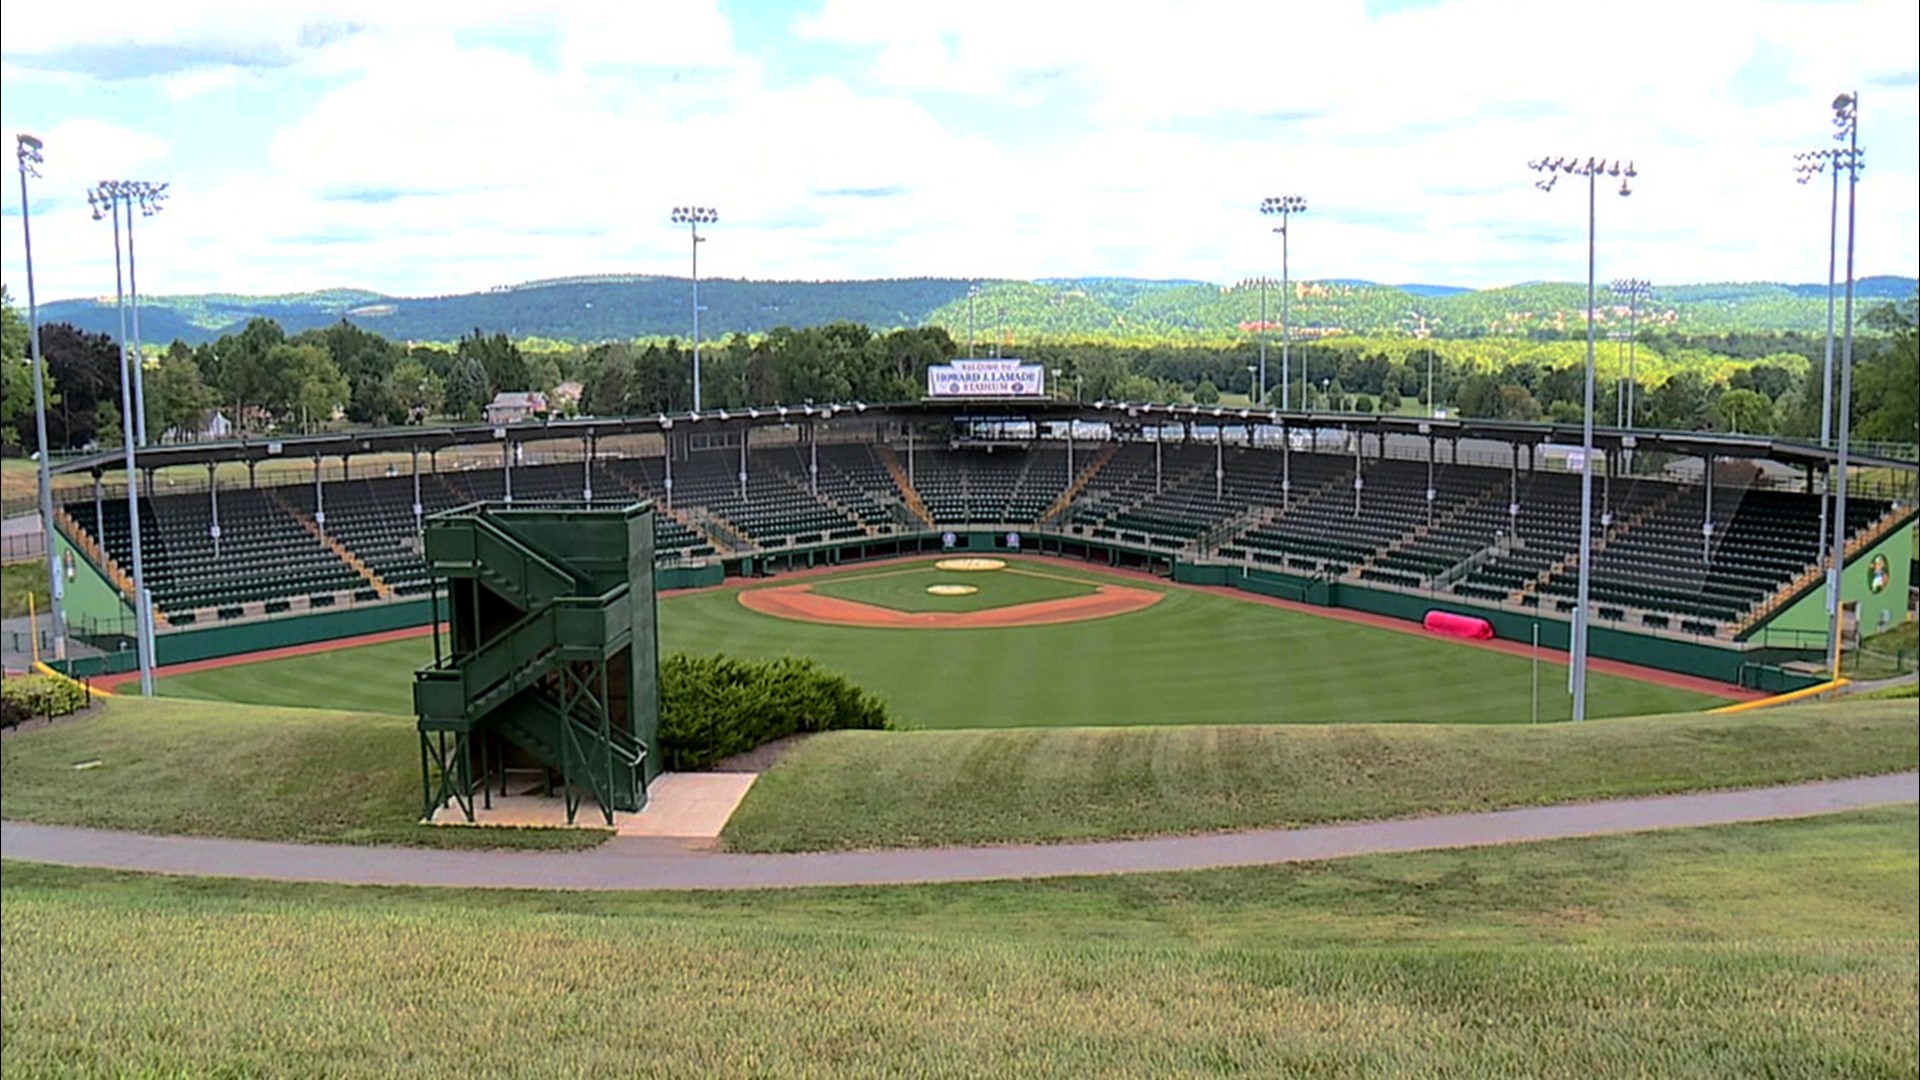 The Little League Baseball and Softball World Series events will be held, as scheduled, this August.